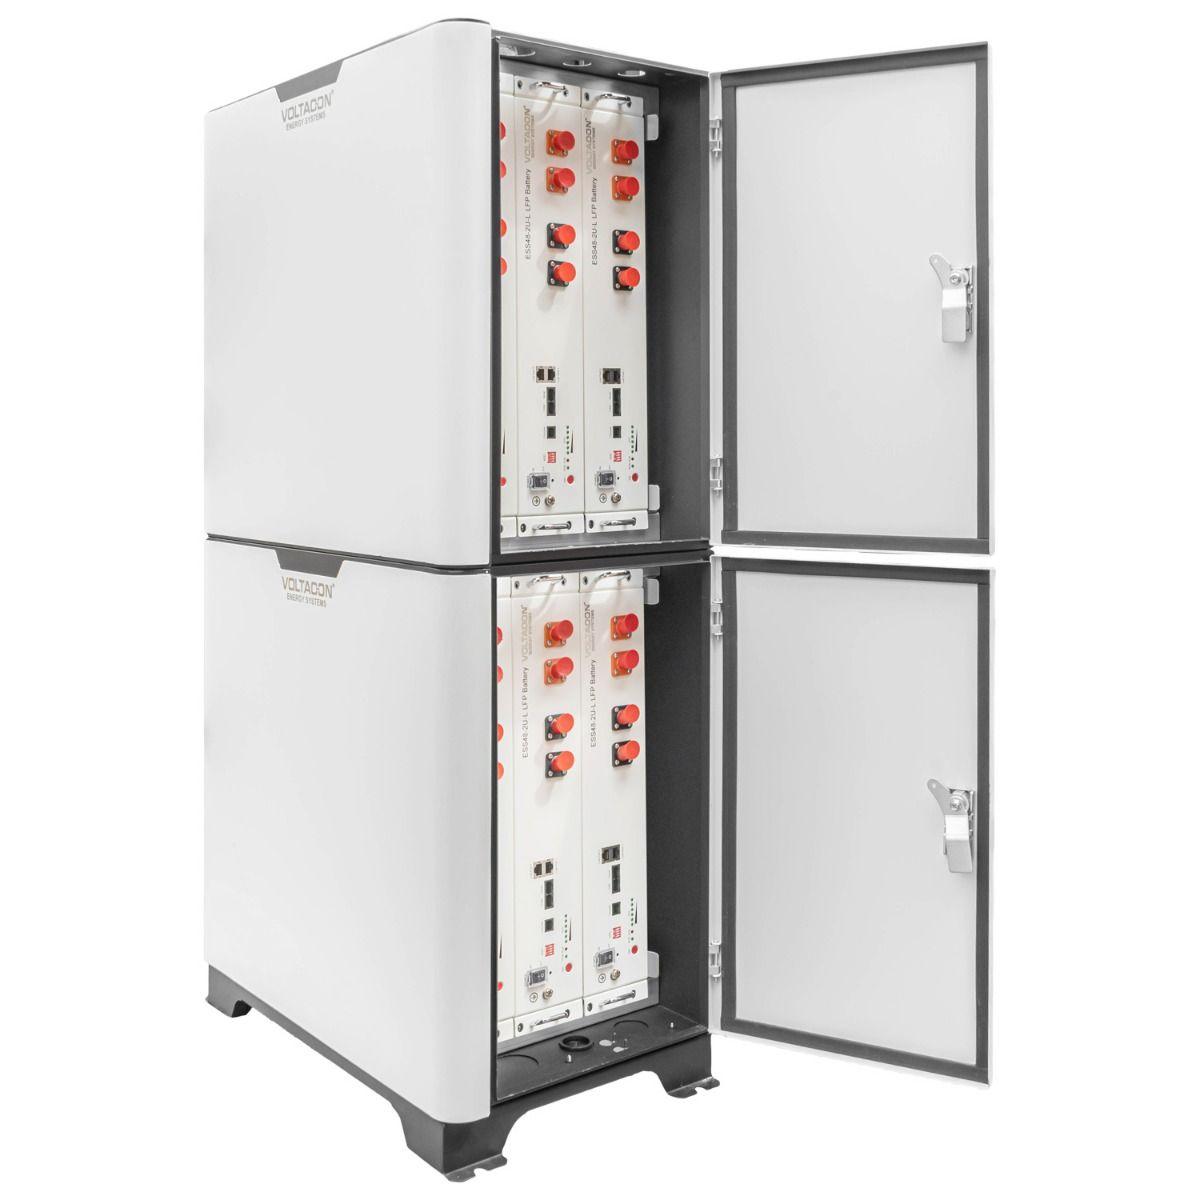 Lithium Ion Battery Energy Storage 7.5kWh And 15kWh 48V - Pylontech US2000C - VoltaconSolar